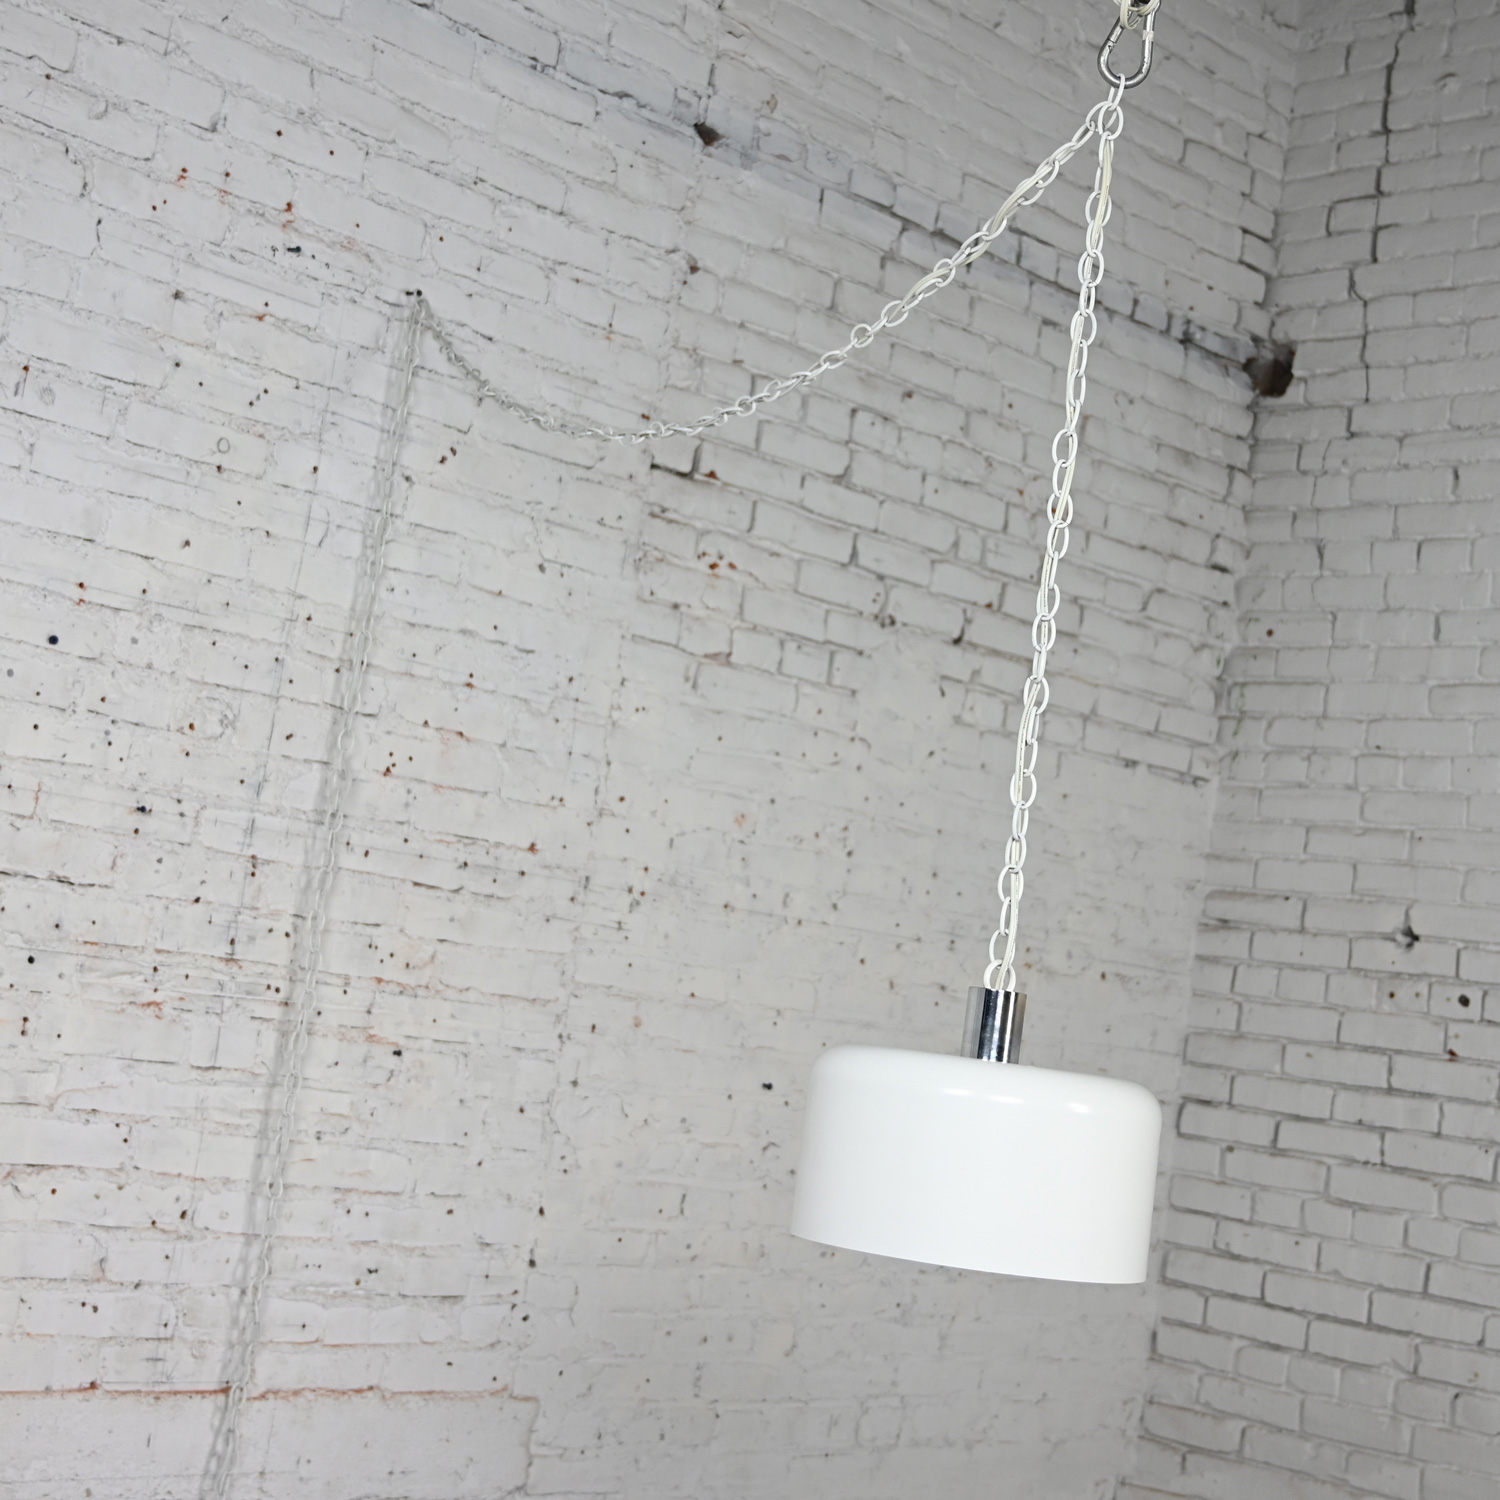 Mid-20th Century Mid Century Modern White Dome Swag Pendant Hanging Light Fixture or Lamp Style of Lightolier